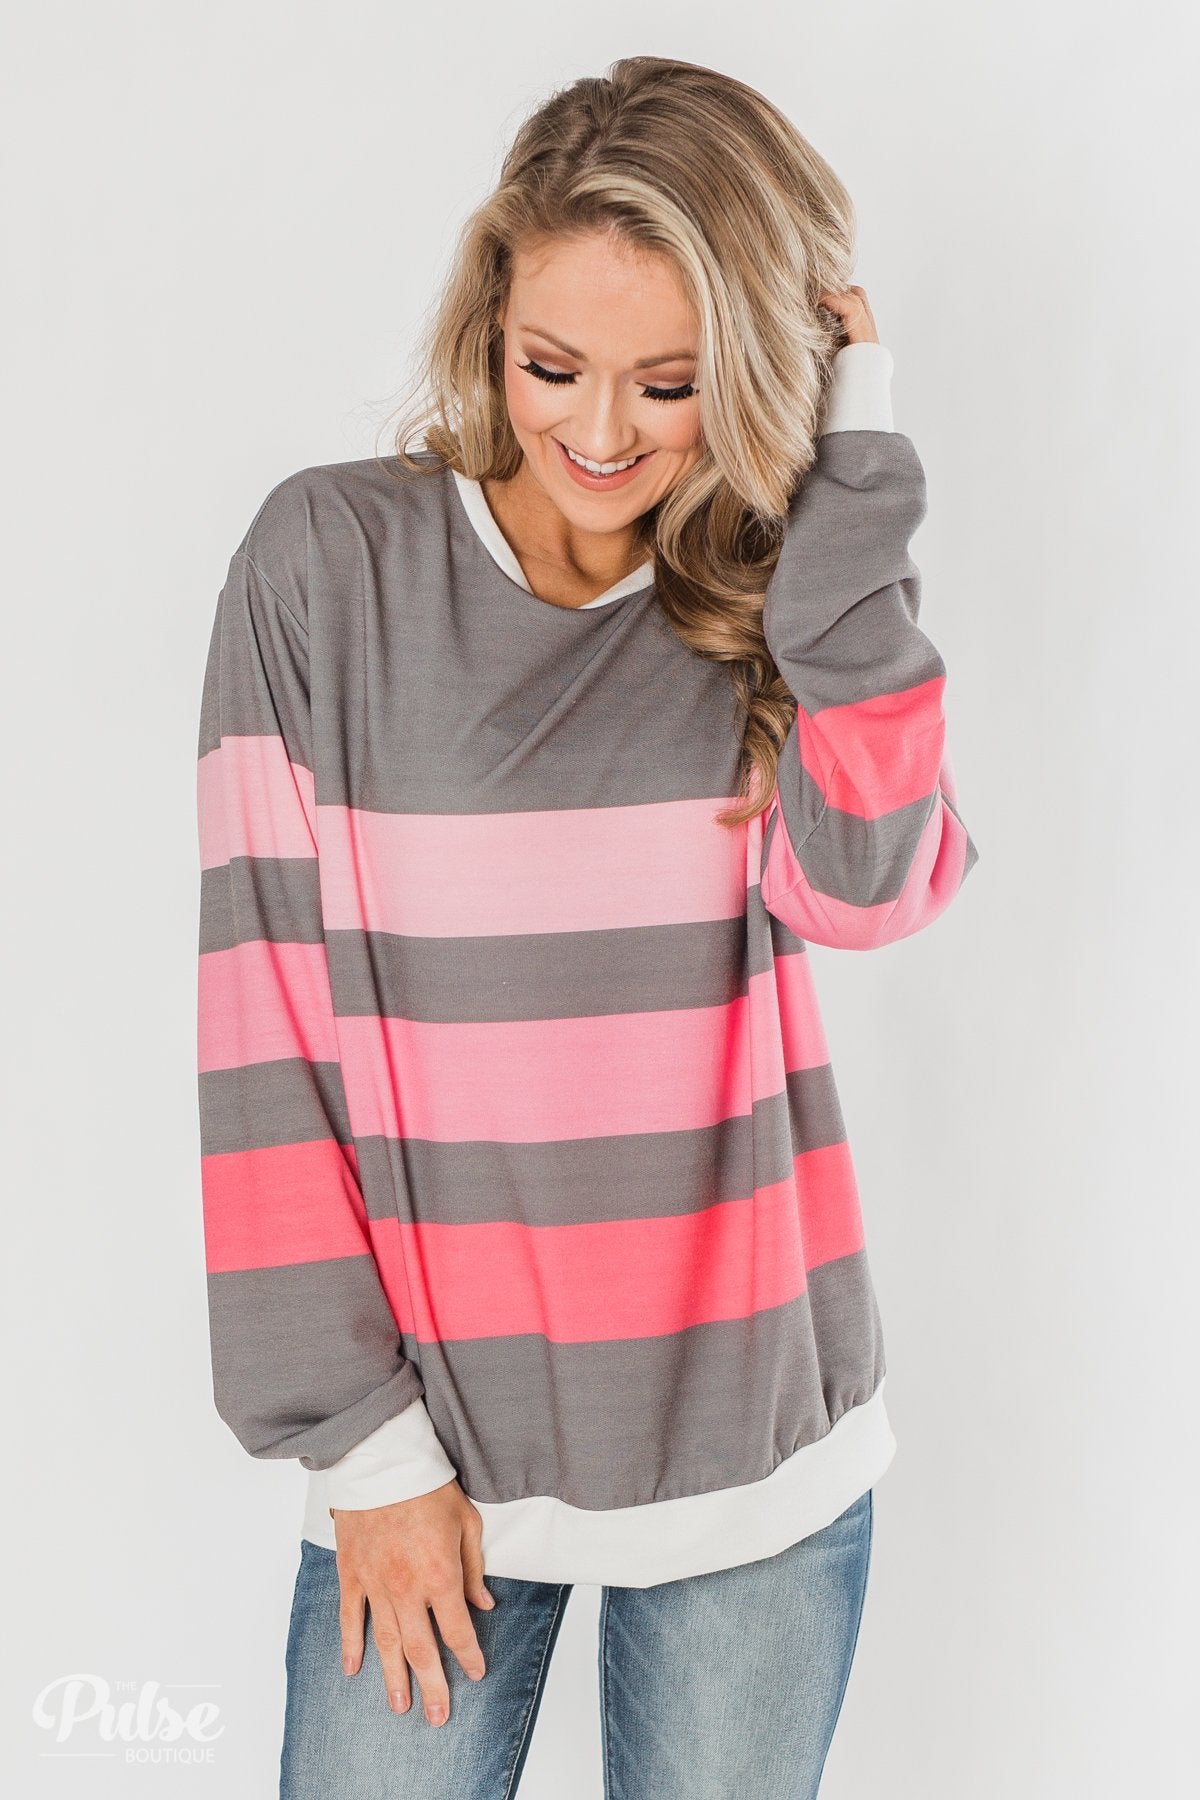 Spring's Pink Dream Striped Top - Comment Sold